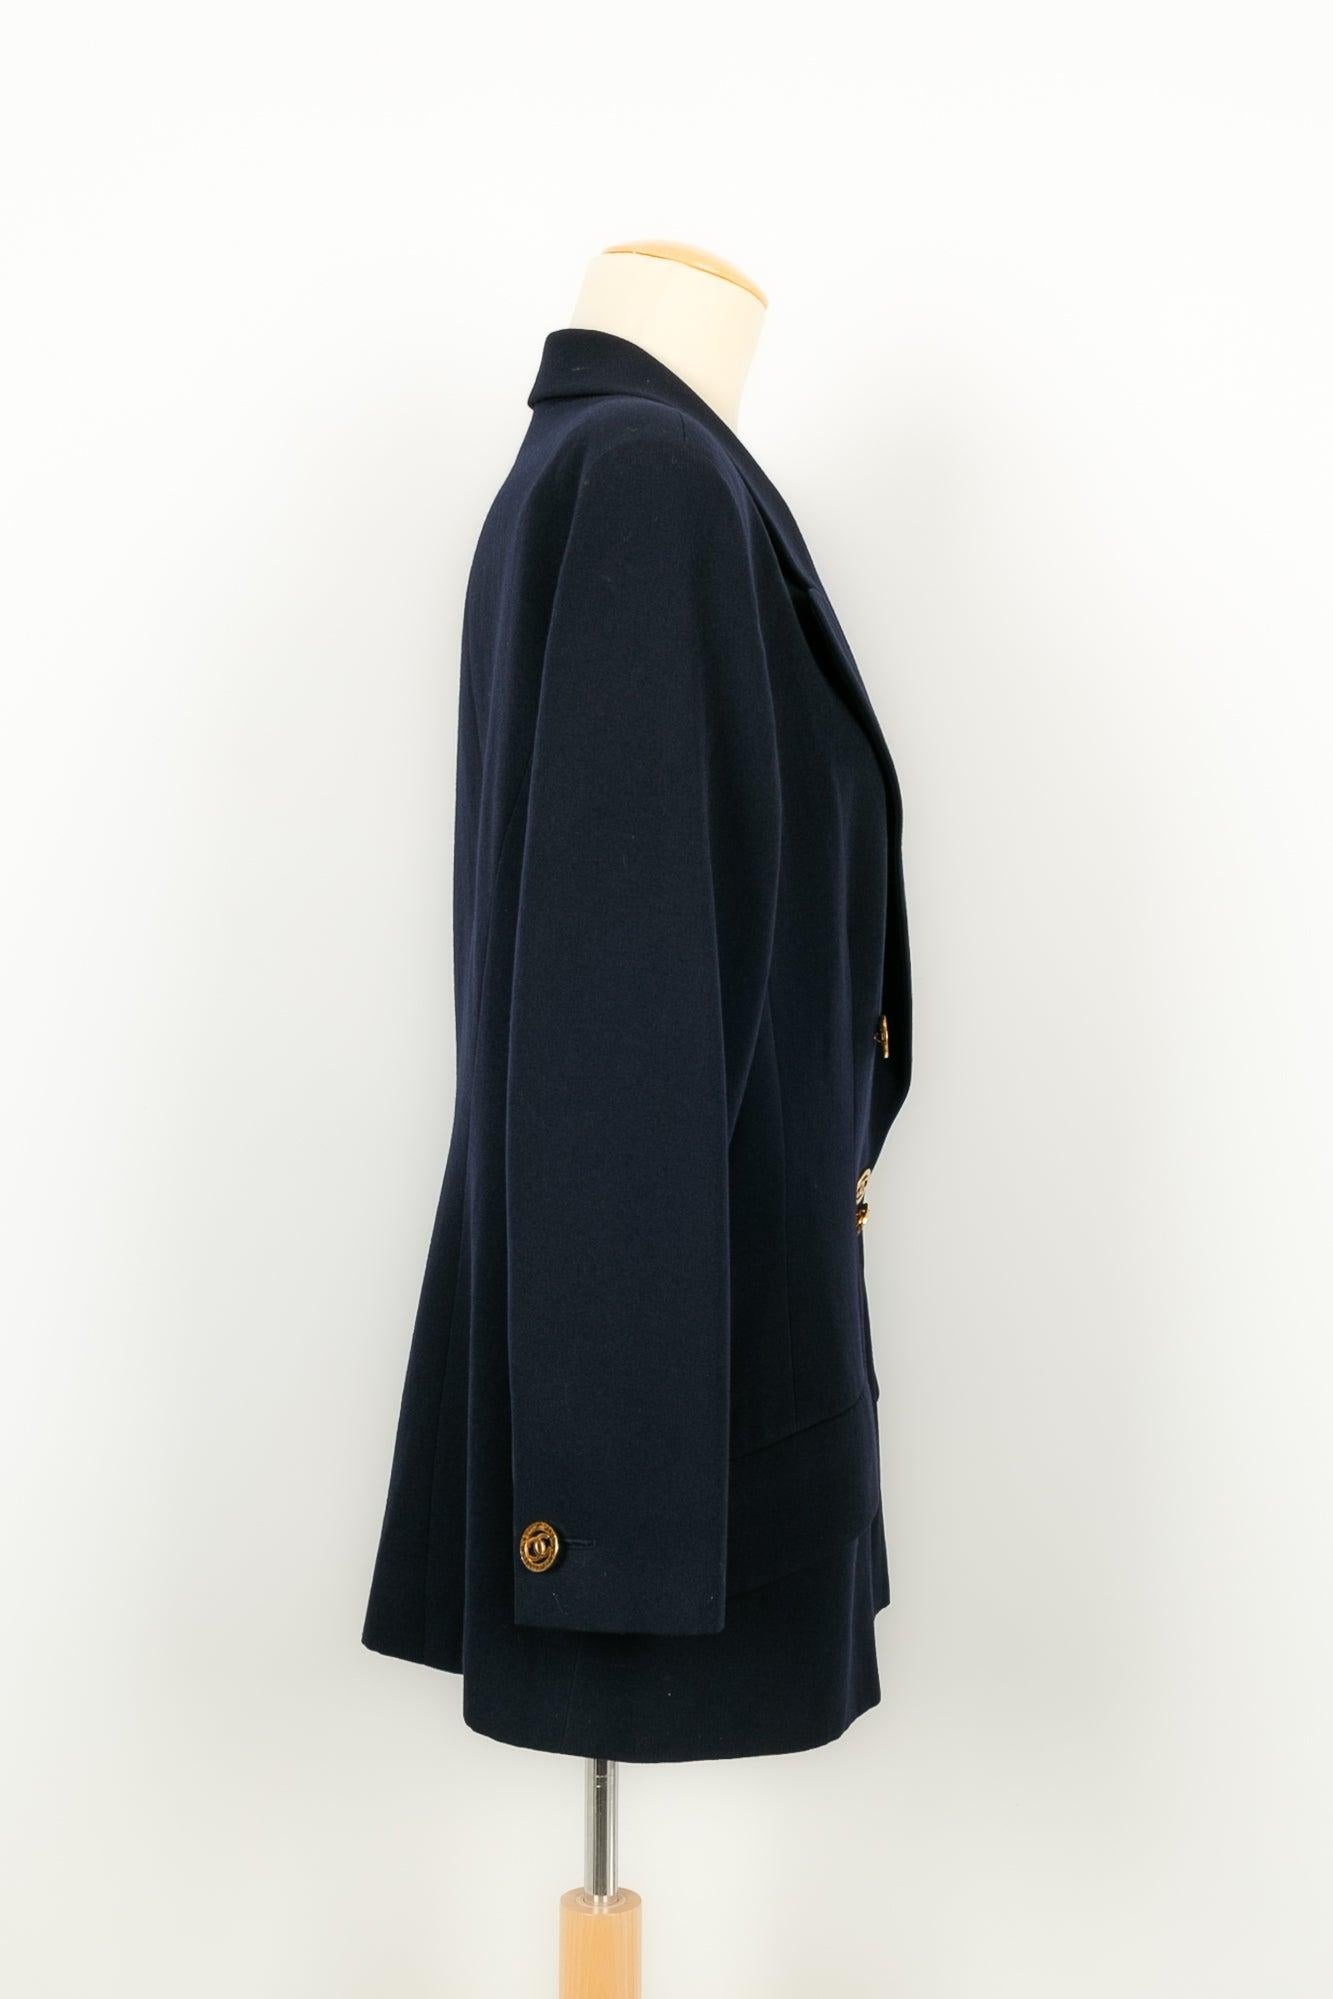 Women's Chanel Navy Blue Wool Jacket with a Silk Lining, 1990s For Sale